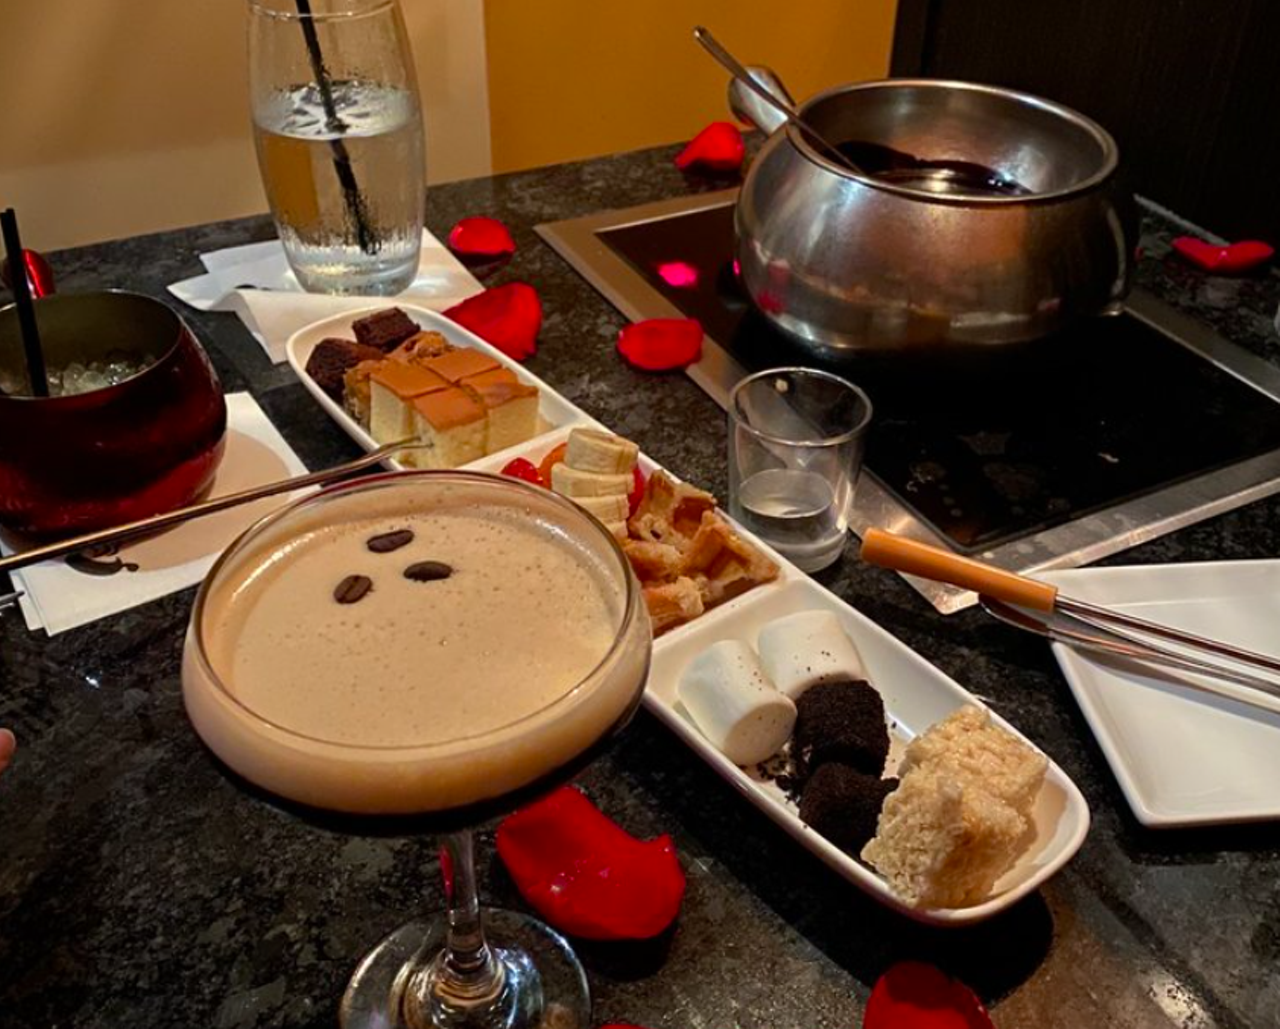 The Melting Pot
4.5 out of 5 stars, 616 reviews
7549 W. Sand Lake Road
”I've been to a numerous amount of Melting Pot locations, and they've tended to be older buildings, and not so high quality settings. Well this location beats them all!” - Tyler S.